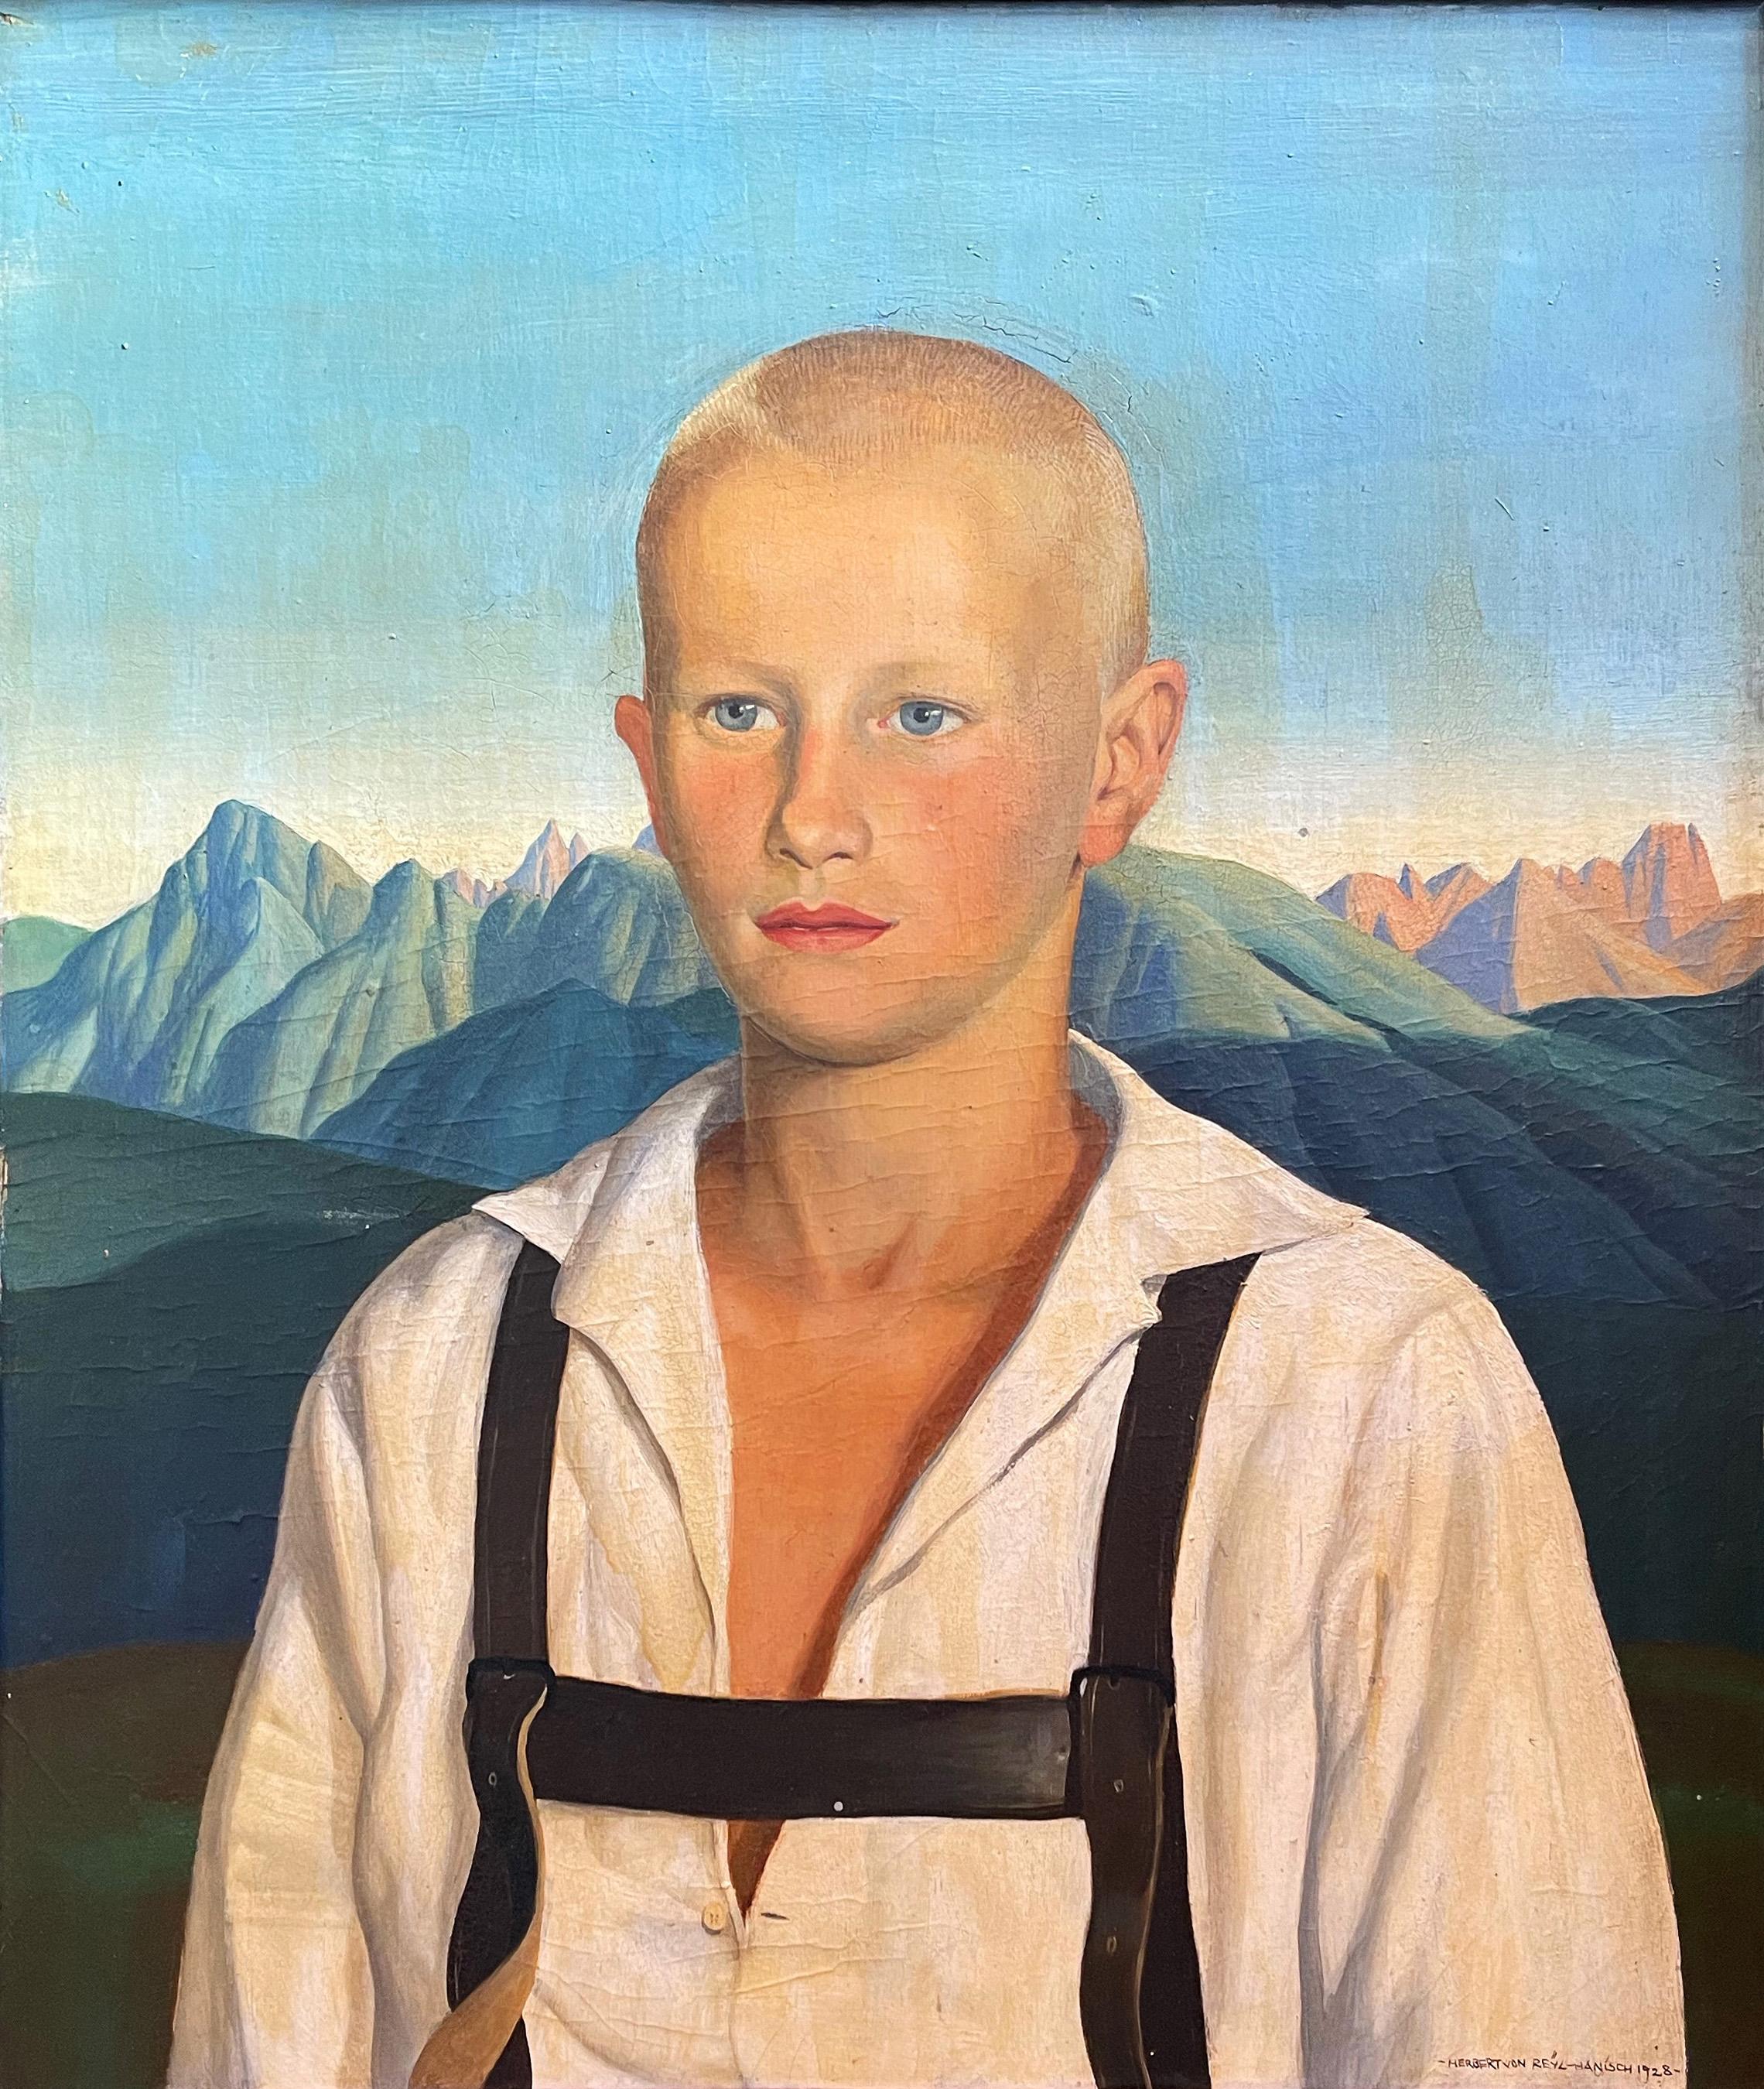 One of the great masterworks of Herbert von Reyl-Hanish and clearly inspired by Renaissance portraits which show a dignified personage with an idyllic landscape behind, this portrait of a young, blond youth in traditional lederhosen is striking and